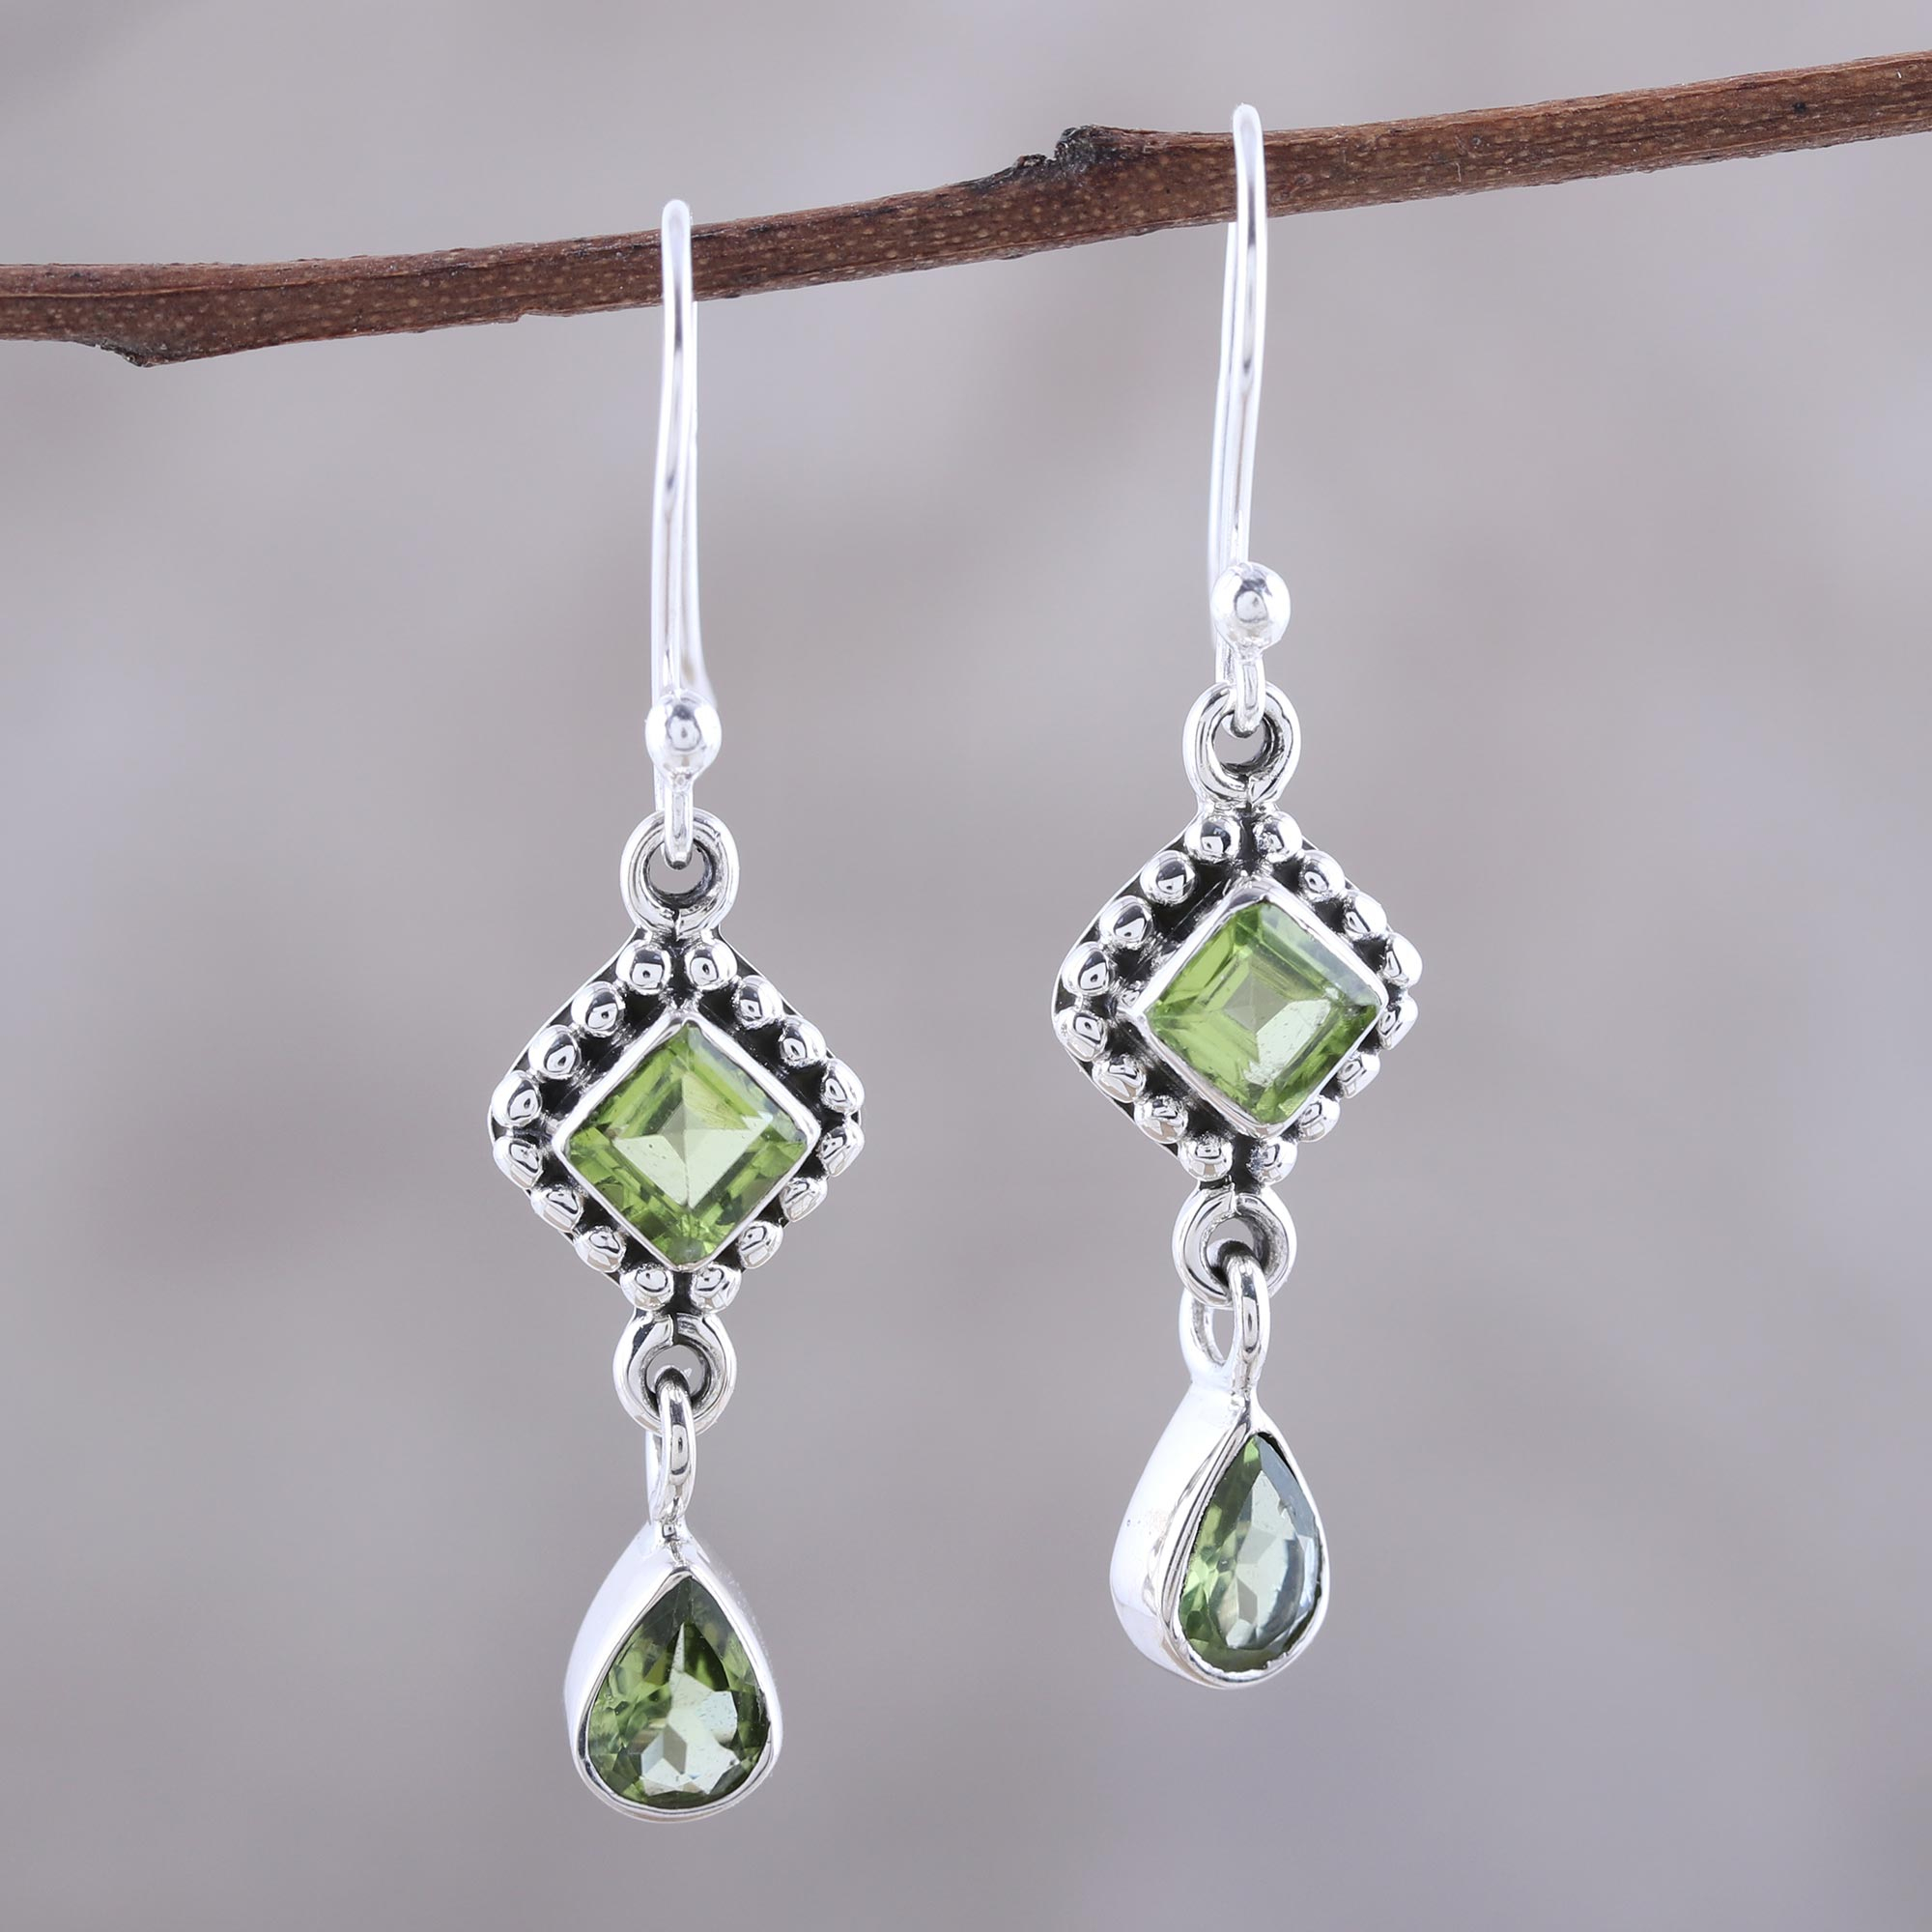 925 Sterling Silver PERIDOT BIRTHDAY PRESENT Stud Earrings 0.4" MADE IN INDIA 